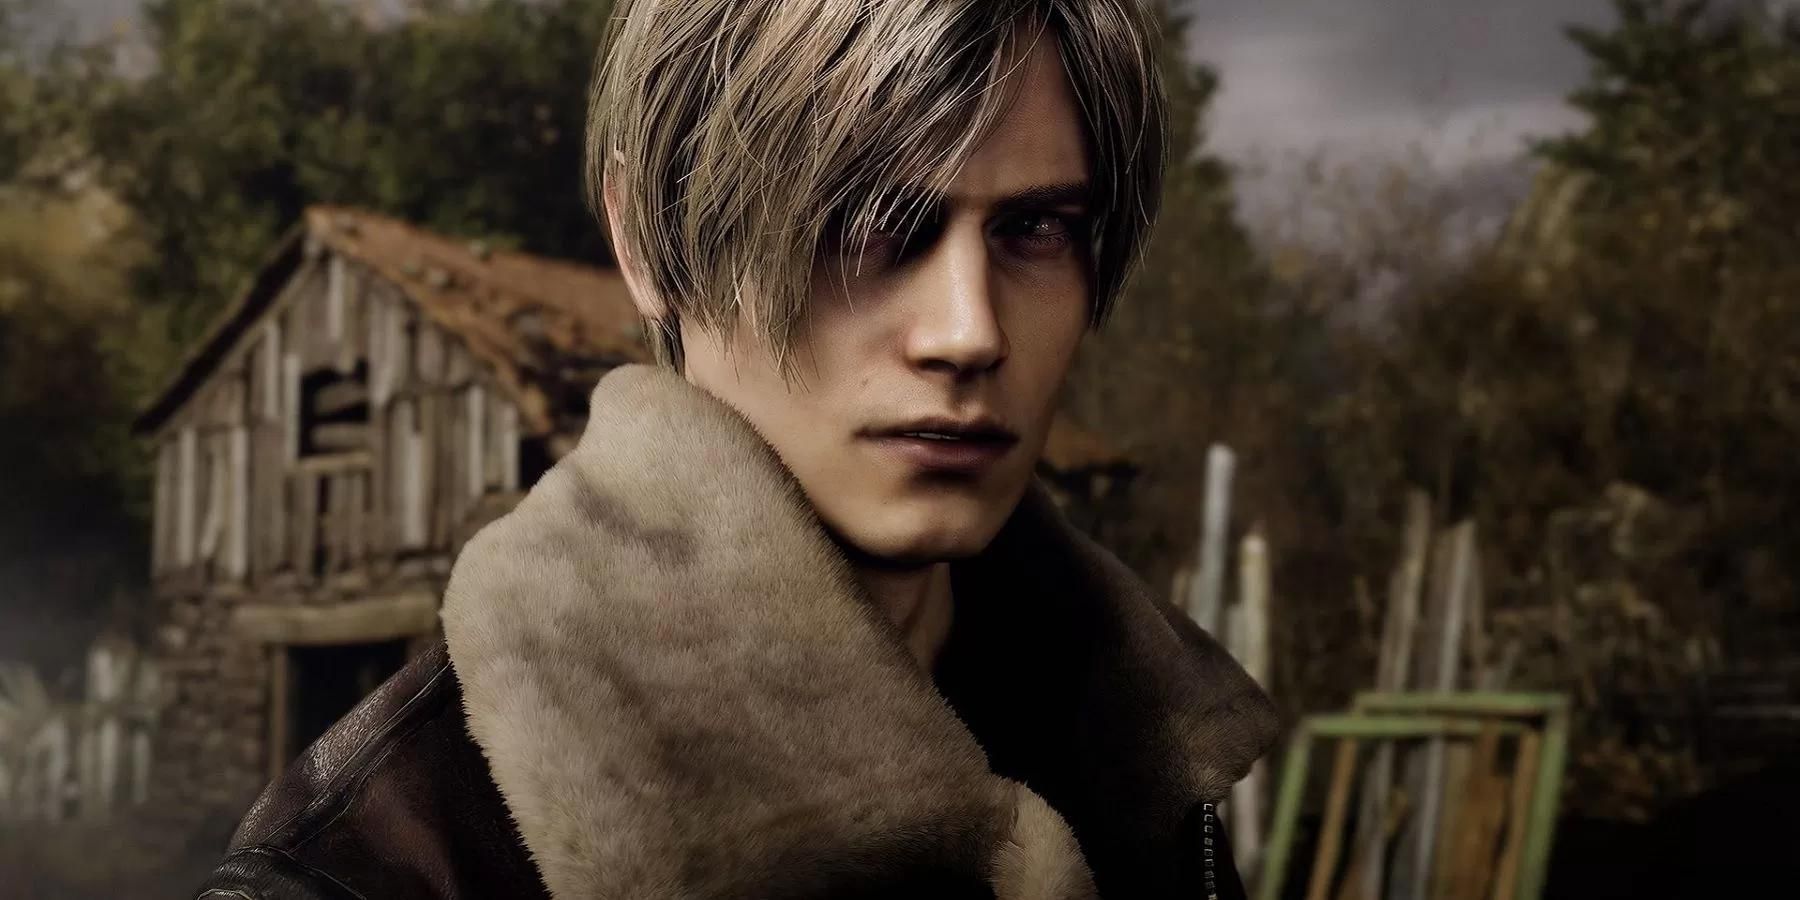 When and where does the Resident Evil 4 remake take place? A primer